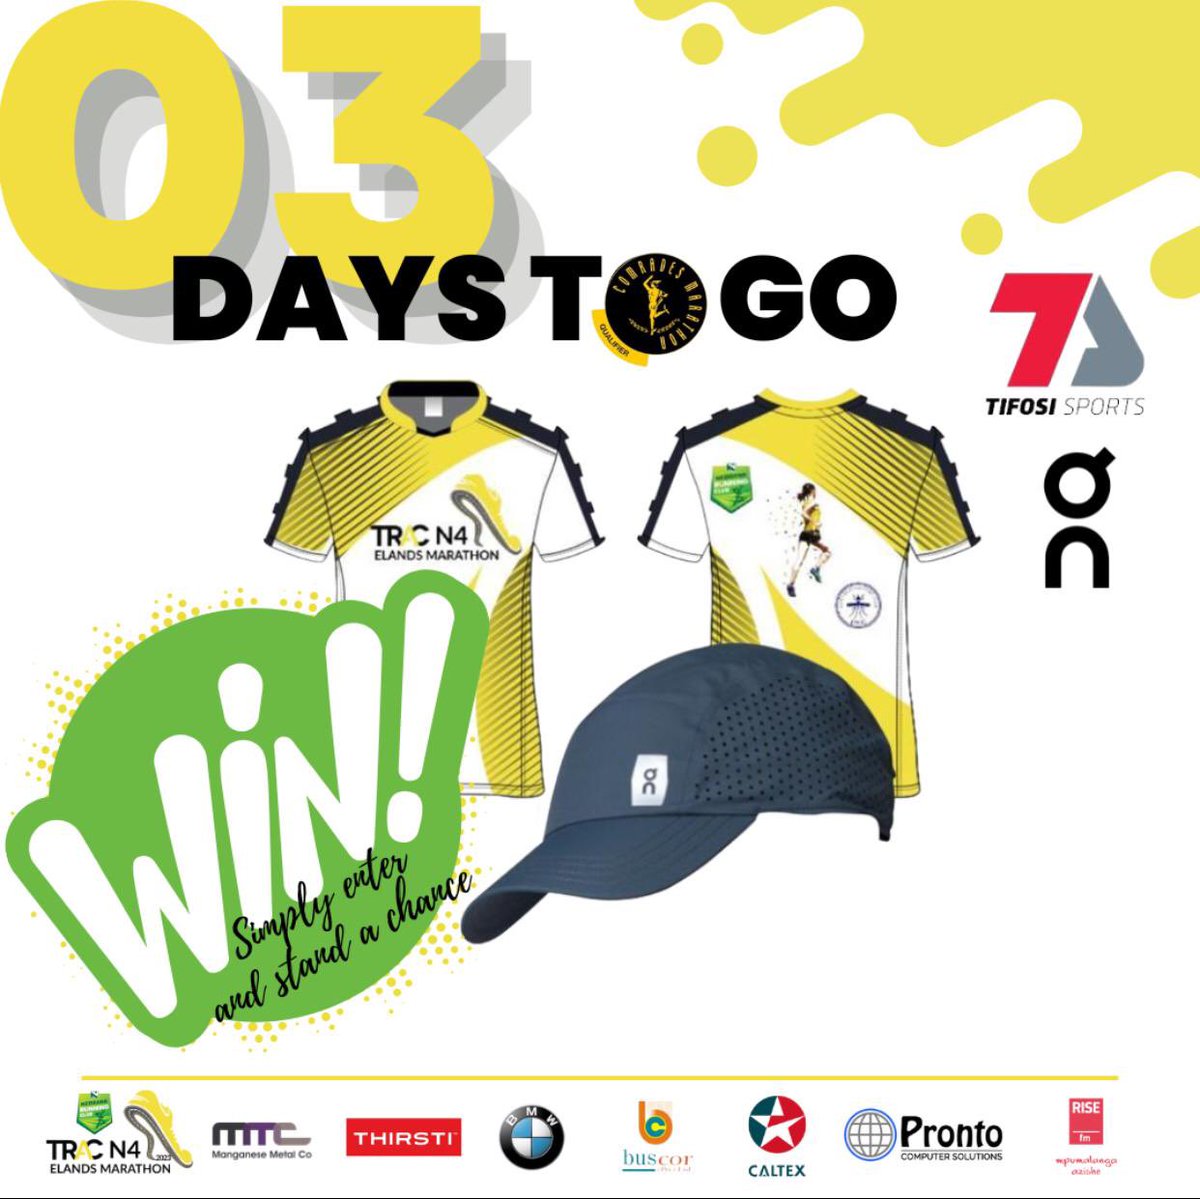 Don’t forget to enter Elands and win big! The countdown is on. #OnRunningSA #AlwaysOn #RunOnClouds #ForgetGravity #FetchYourBody2023 #RunningWithTumiSole #MoreThanJustAClub @ThirstiW @BiogenSA @TRACN4route @TifosiSports @on_running @Nedbank_RC @nedbanksport @NedbankL @BESTERNICK